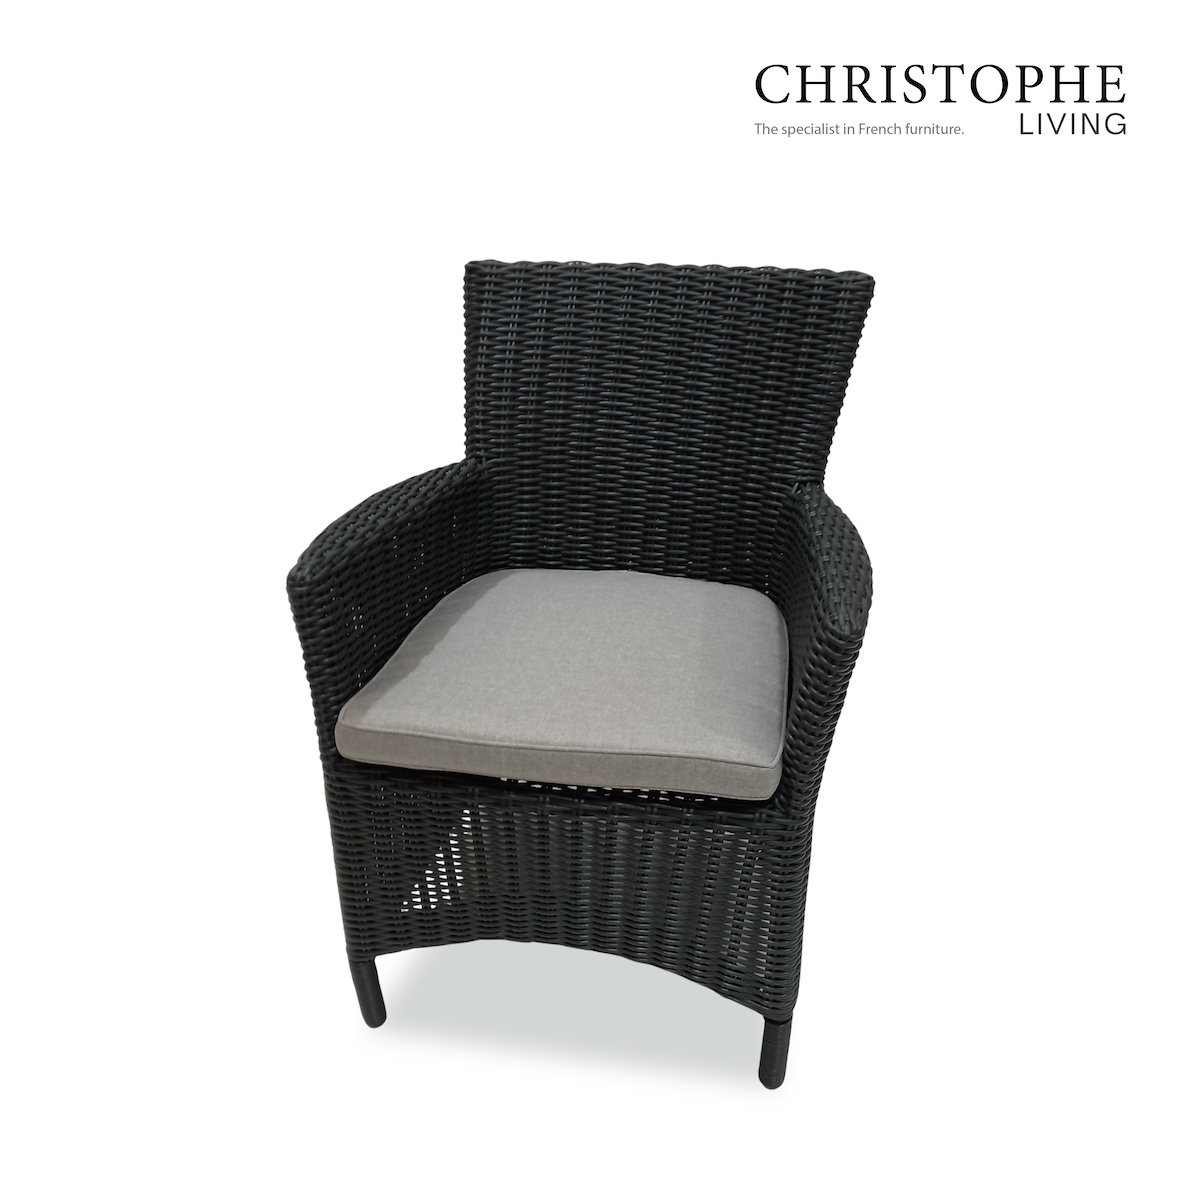 Four Mile Anthracite Outdoor Dining Chair in Synthetic Rattan Weave and Water-Resistant Fabric